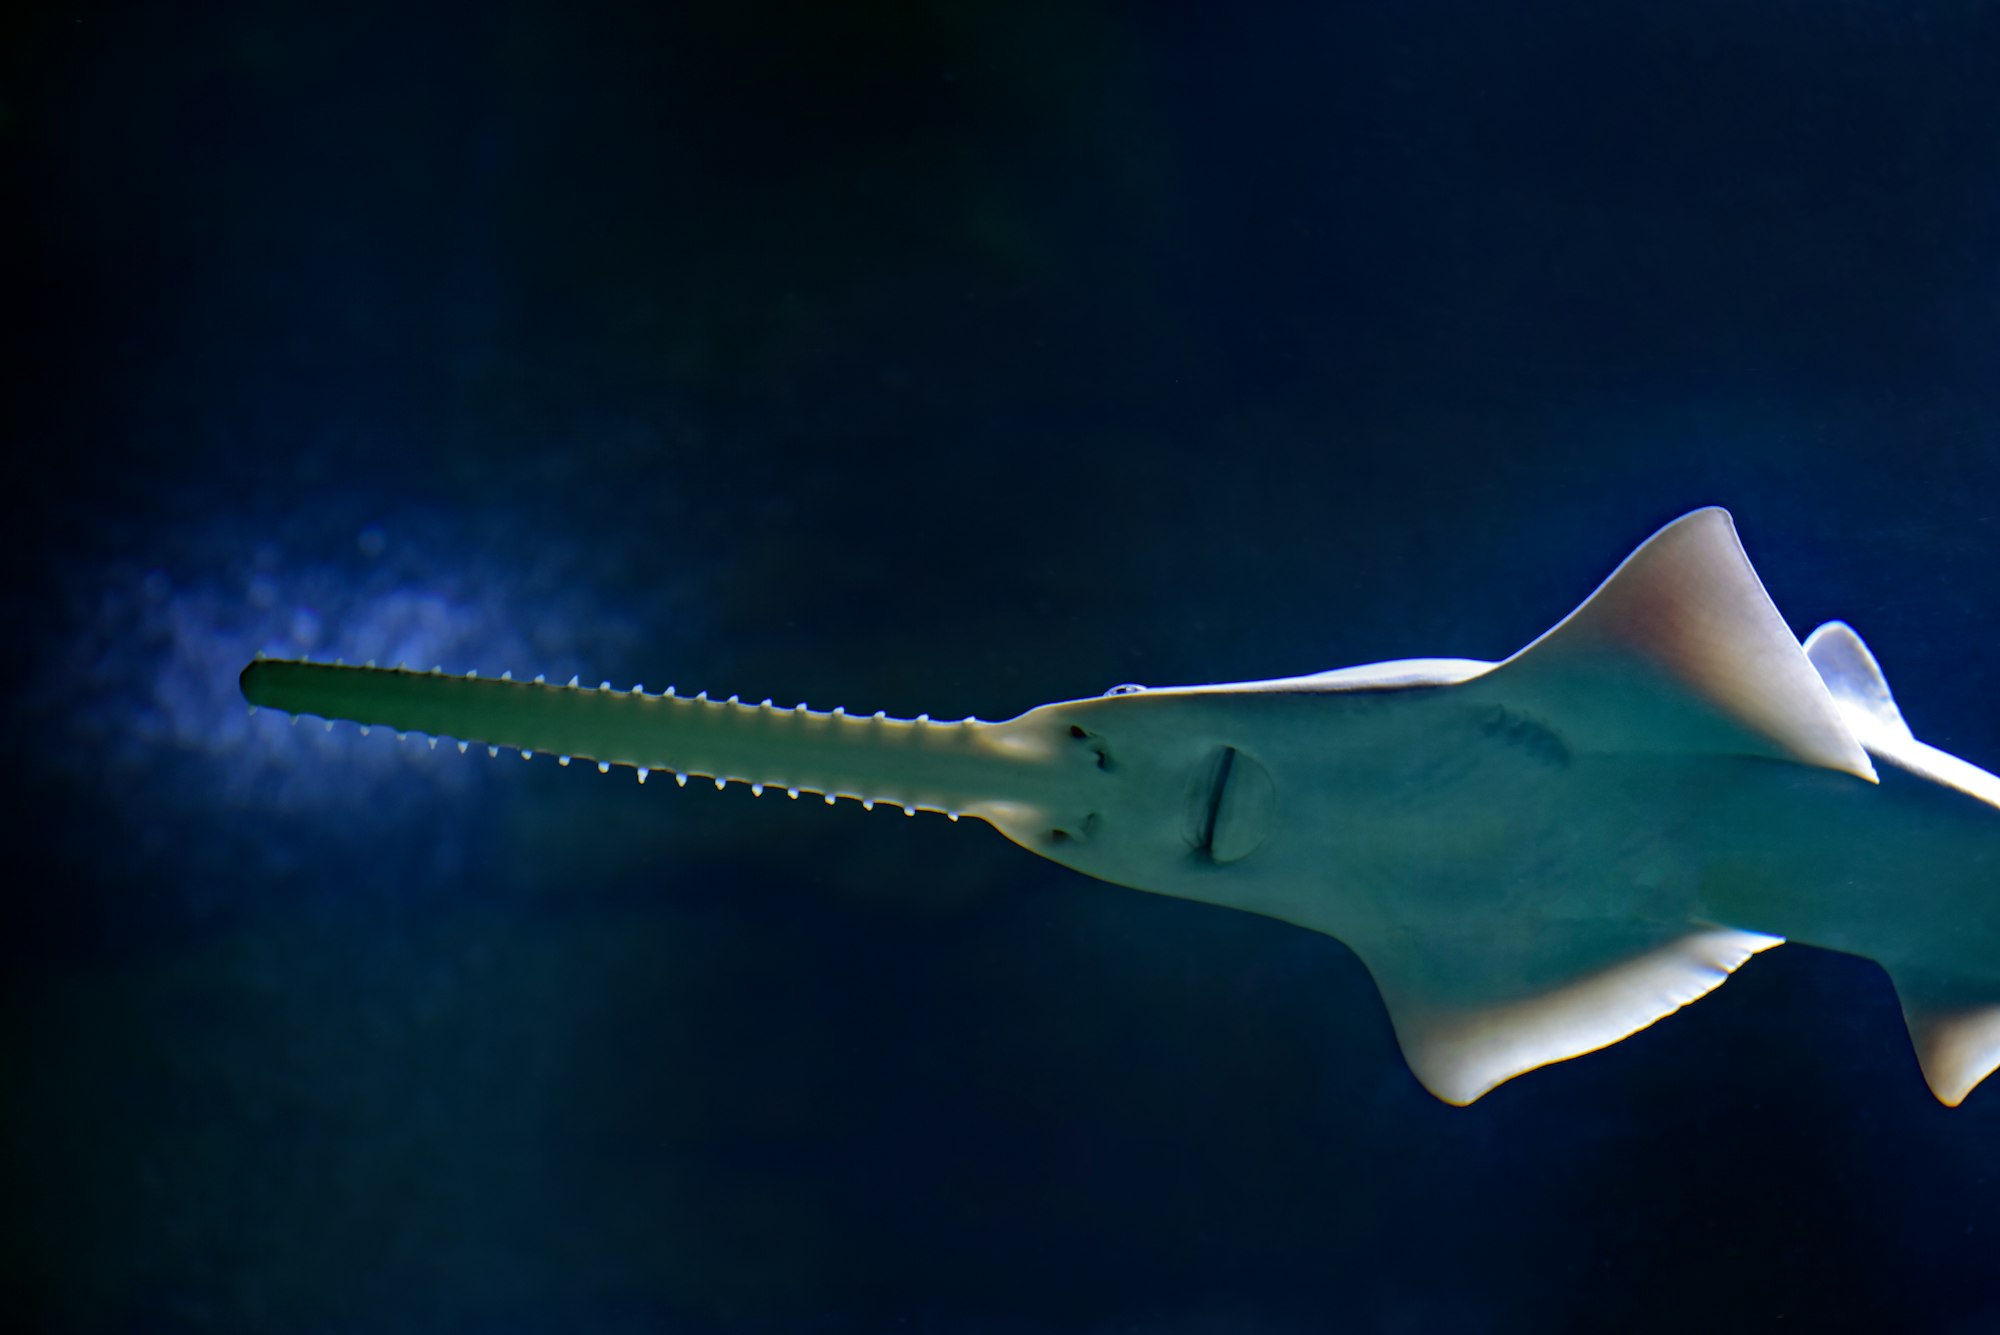 Freshwater sawfish.There are two freshwater sawfishes at the Cairns Aquarium, and this is the smaller of the two. These incredible creatures can grow to a large size, about 20 feet/7 metres long. They can use the saw to stir up the bottom and expose hidden prey, or use the saw to slash sideways at schools of fish, and then catch an eat the wounded fish.